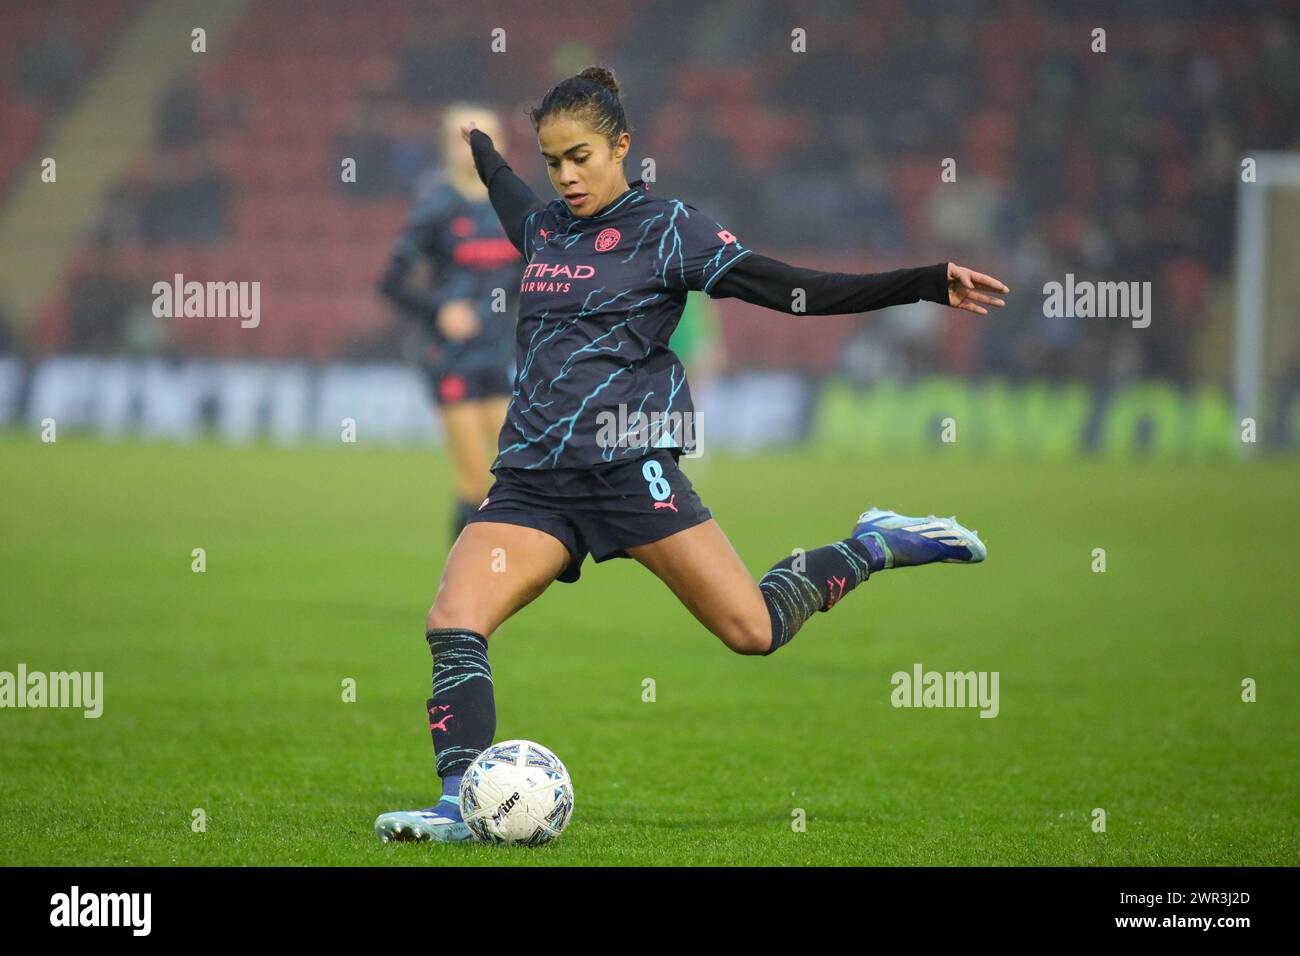 London, UK. 10th Mar, 2024. London, England, March 10th 2024: Mary Fowler (8 Manchester City) crosses the ball during the Womens FA Cup game between Tottenham Hotspur and Manchester City at Brisbane Road in London, England. (Alexander Canillas/SPP) Credit: SPP Sport Press Photo. /Alamy Live News Stock Photo